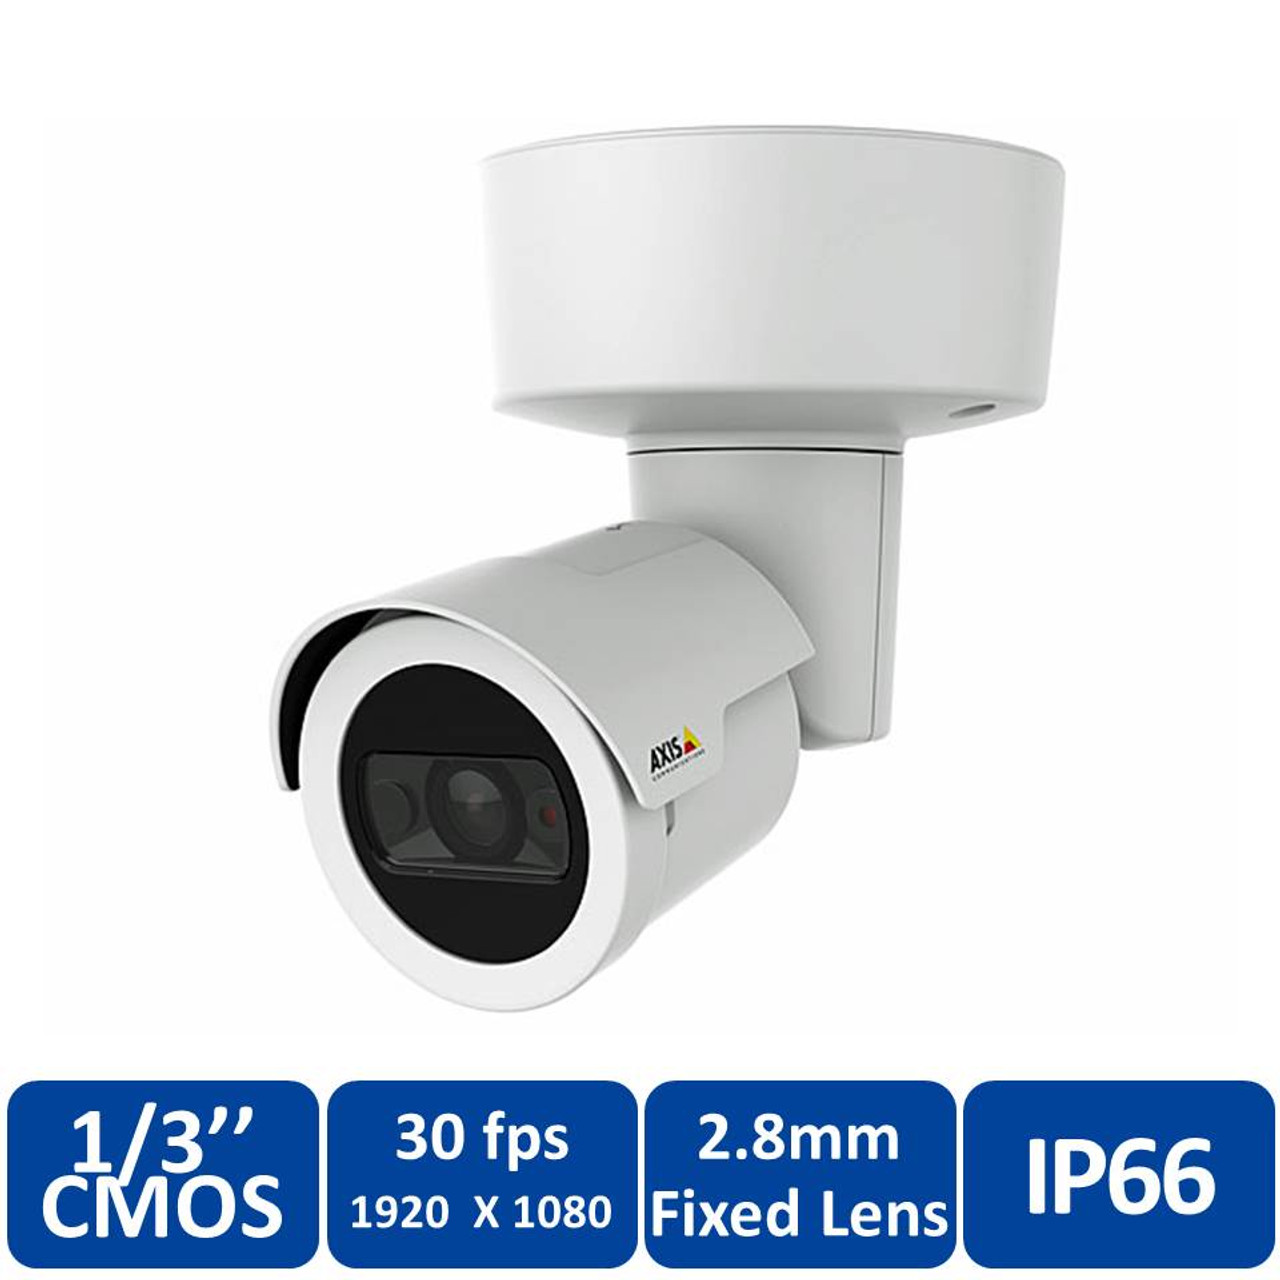 AXIS M2025-LE 2MP Outdoor Bullet IP Security Camera - 0911-001